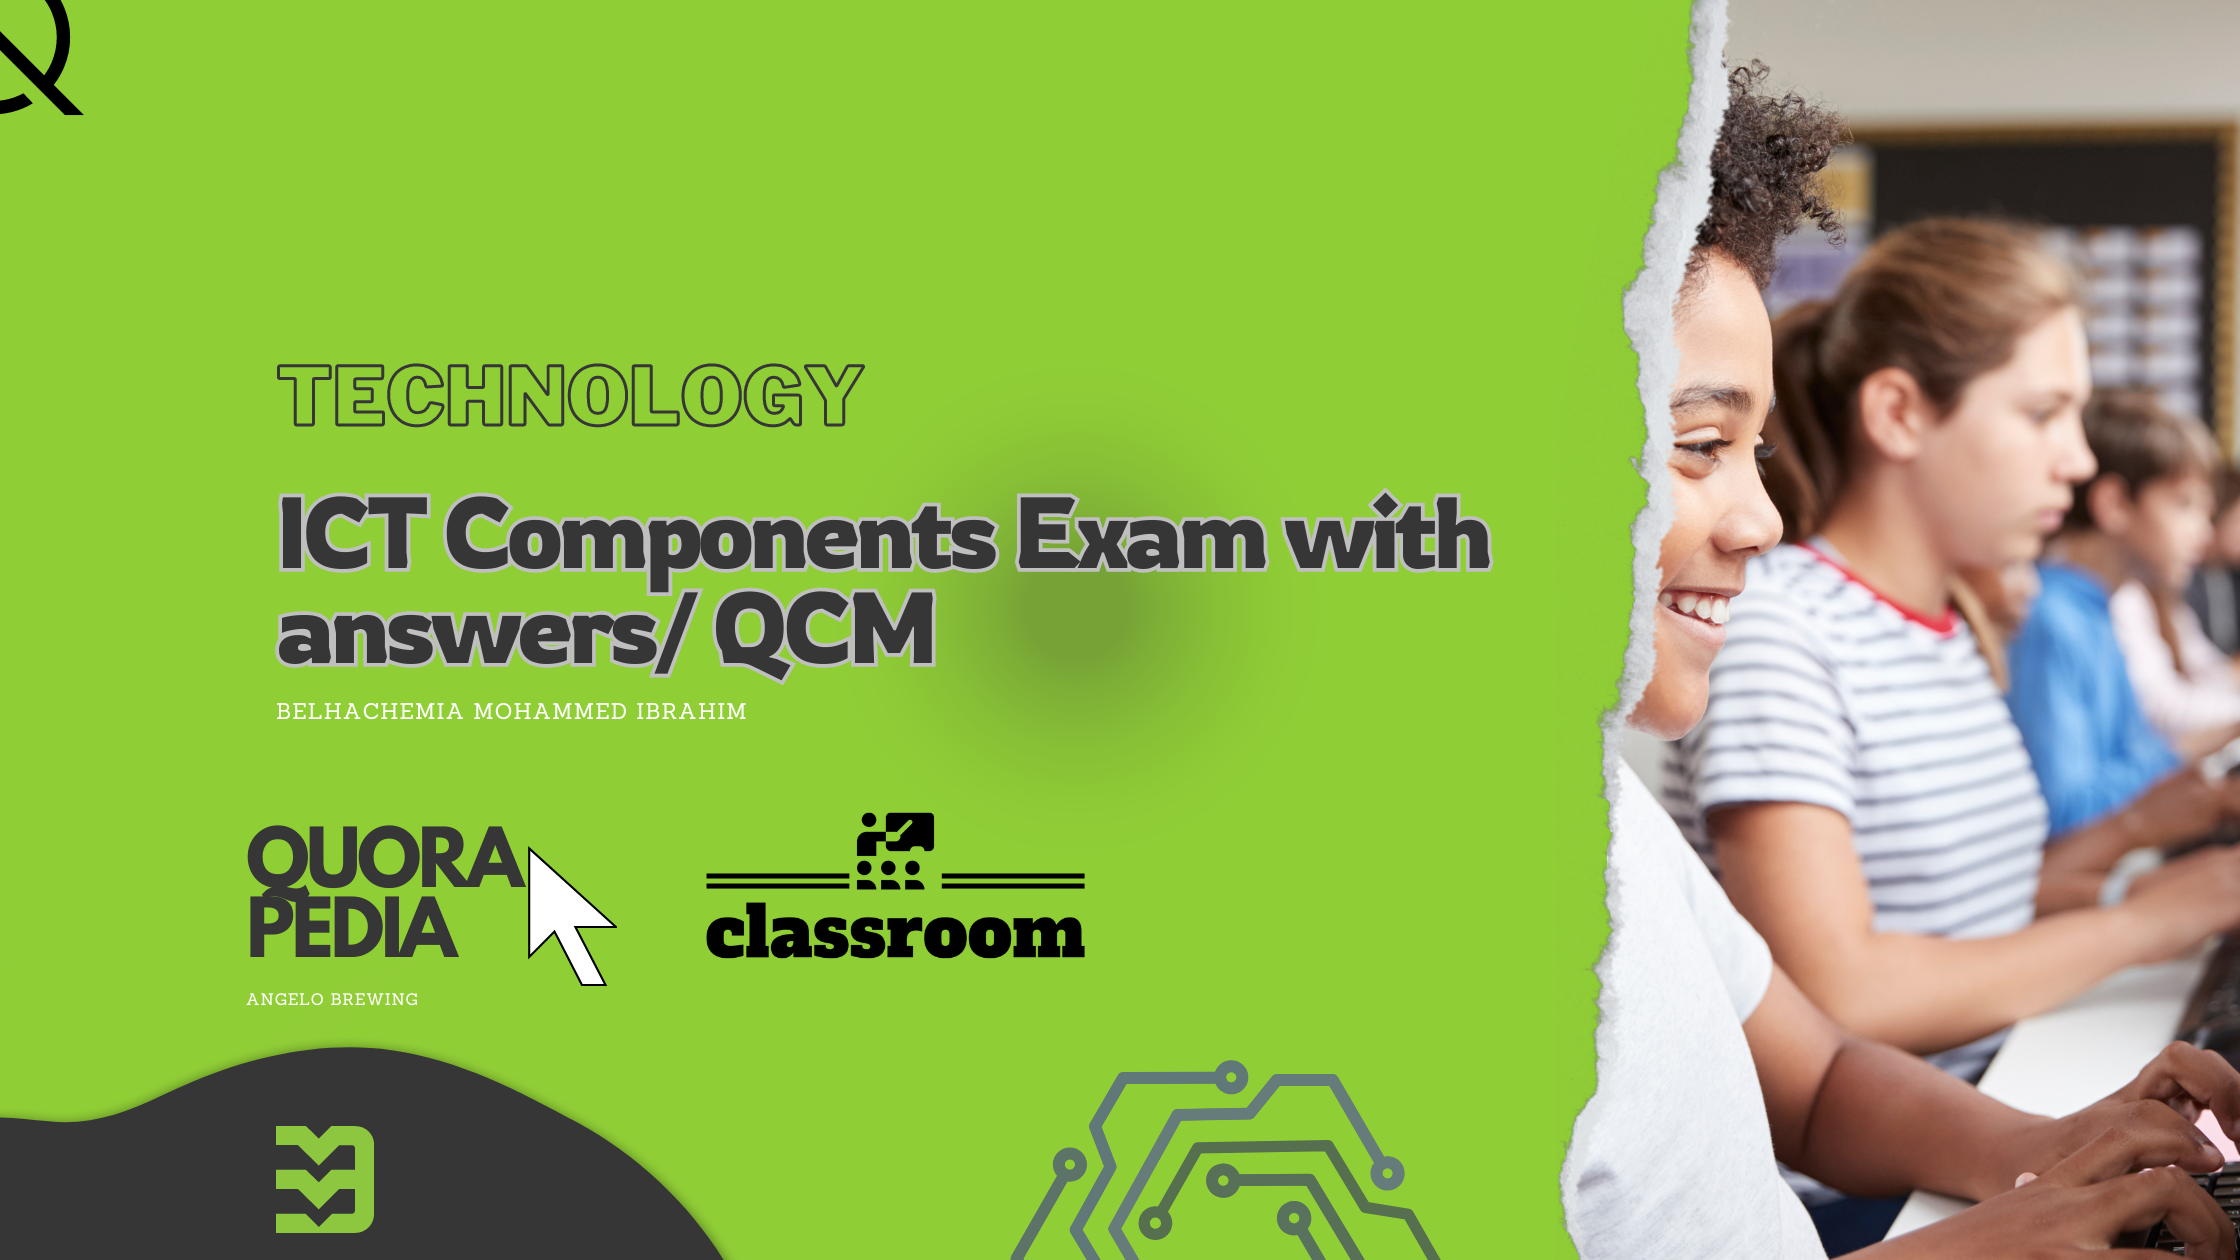 ICT Components Exam with answers/ QCM